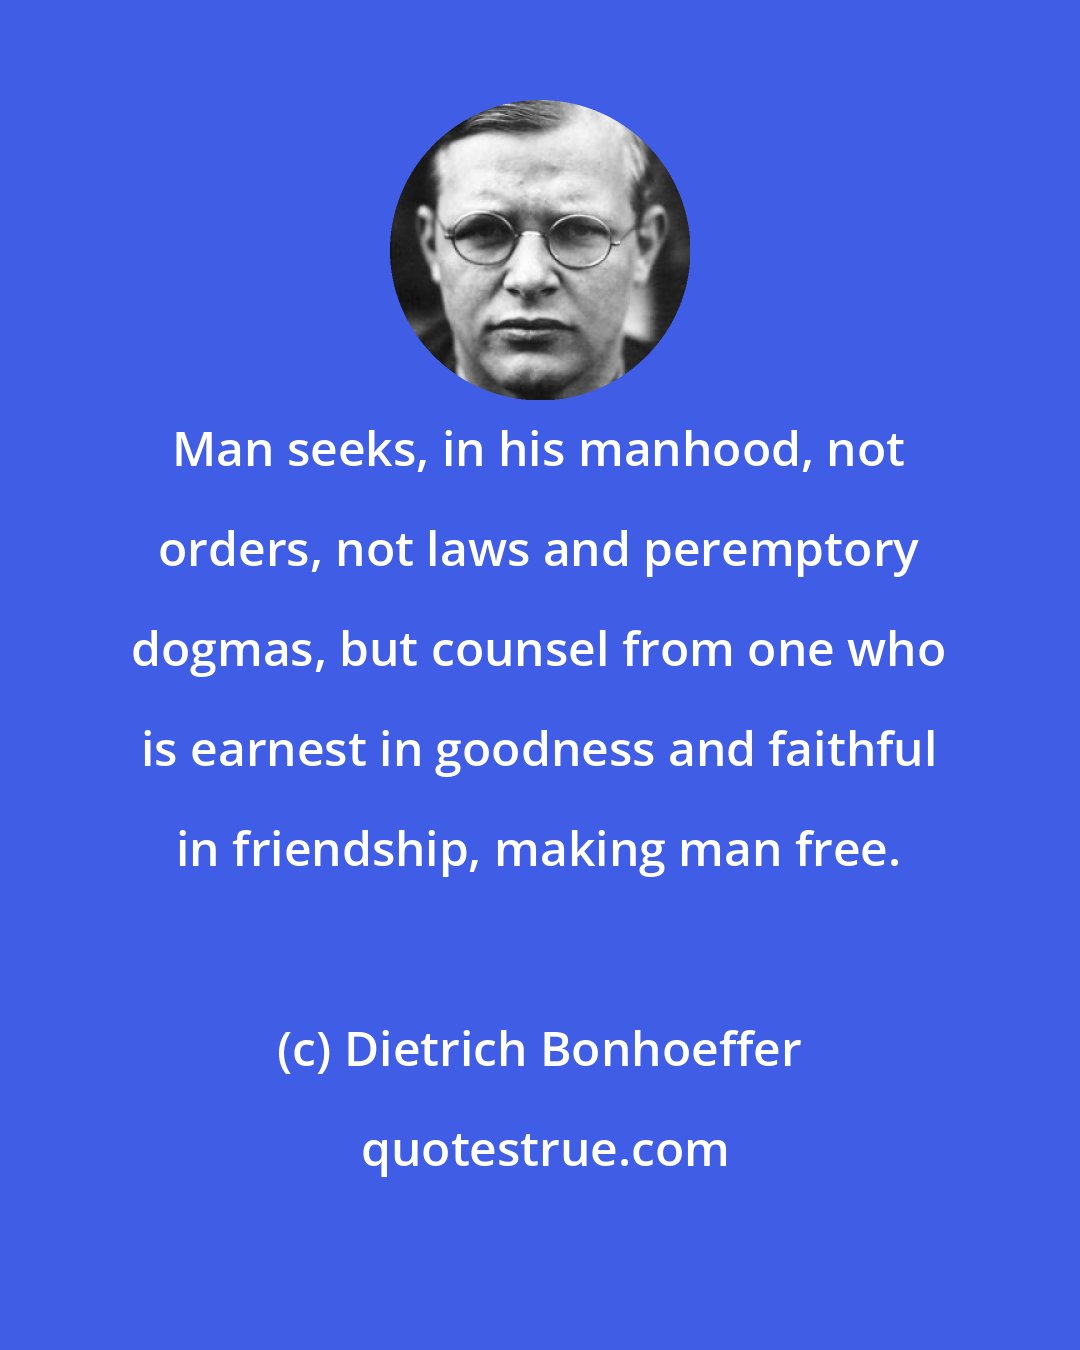 Dietrich Bonhoeffer: Man seeks, in his manhood, not orders, not laws and peremptory dogmas, but counsel from one who is earnest in goodness and faithful in friendship, making man free.